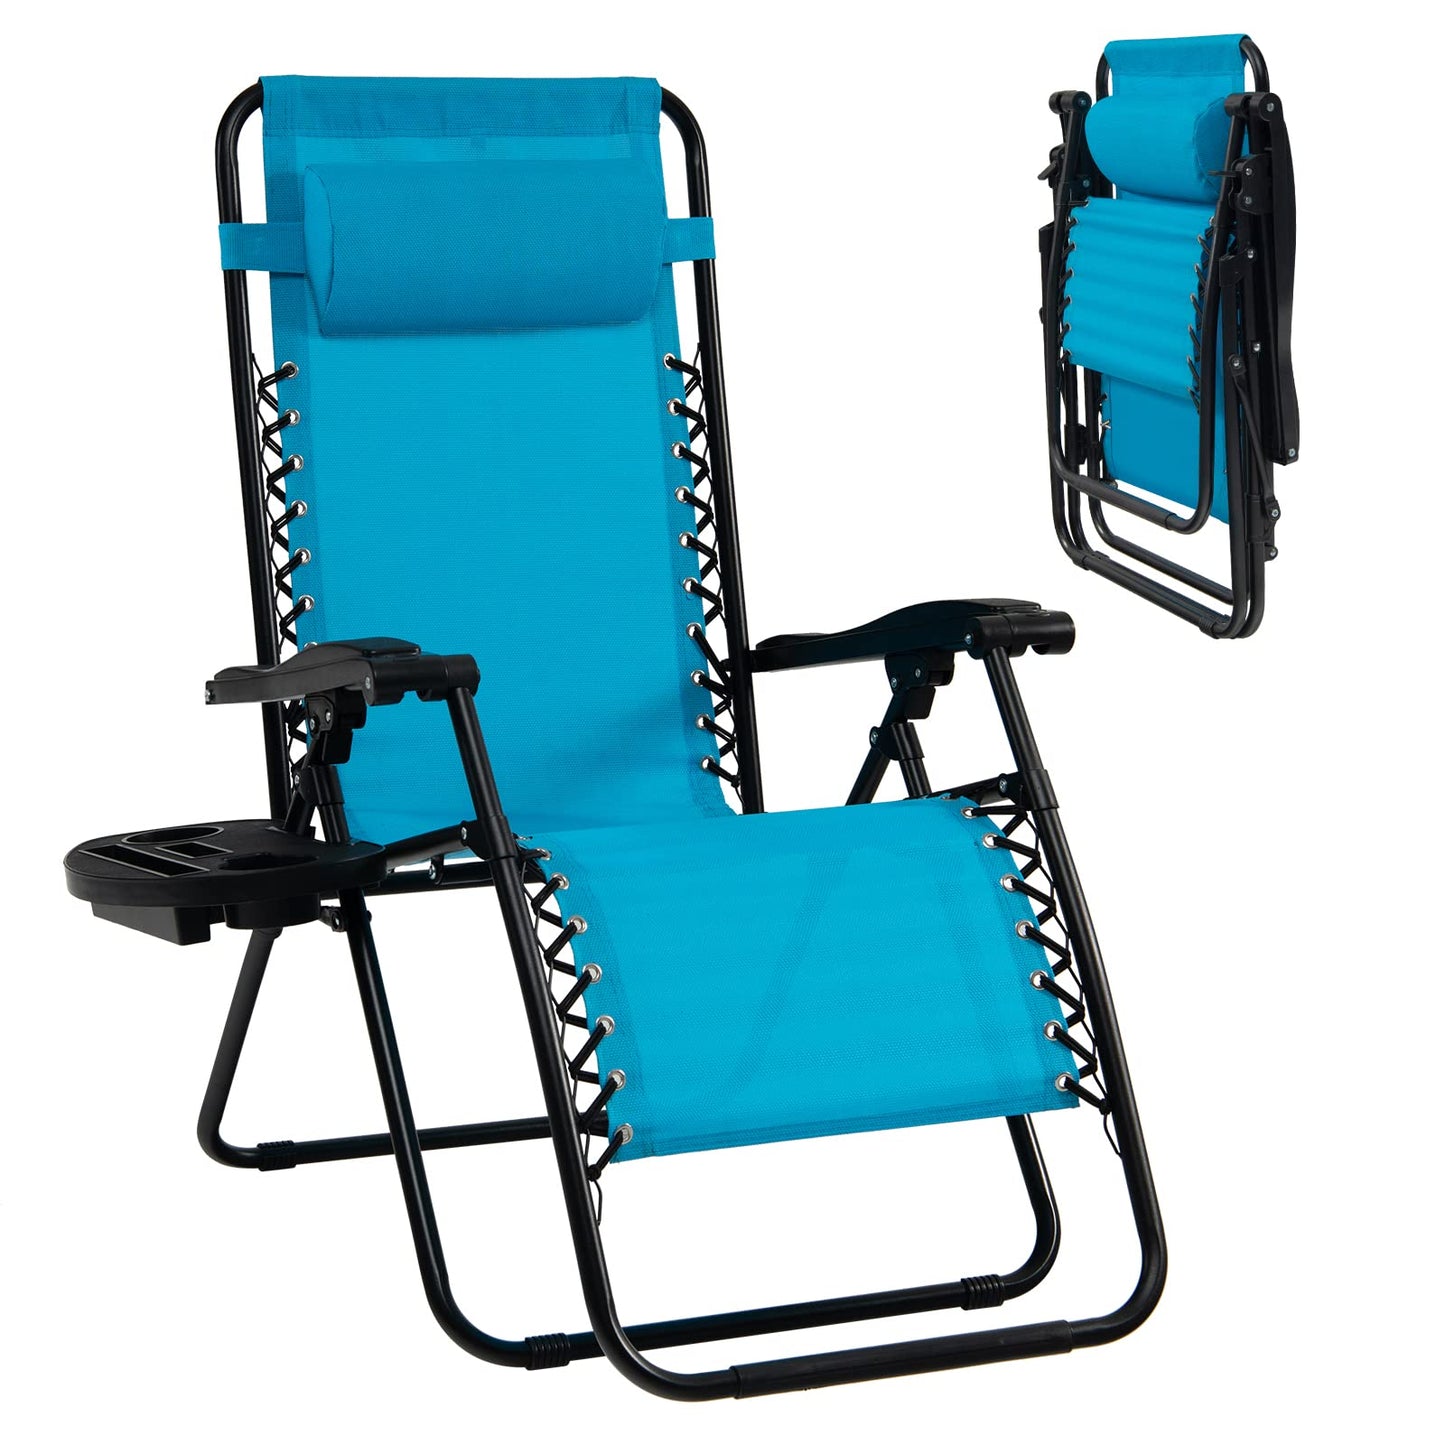 Goplus Zero Gravity Chair, Adjustable Folding Reclining Lounge Chair with Pillow and Cup Holder, Patio Lawn Recliner for Outdoor Pool Camp Yard (1, Light Blue) set of 1